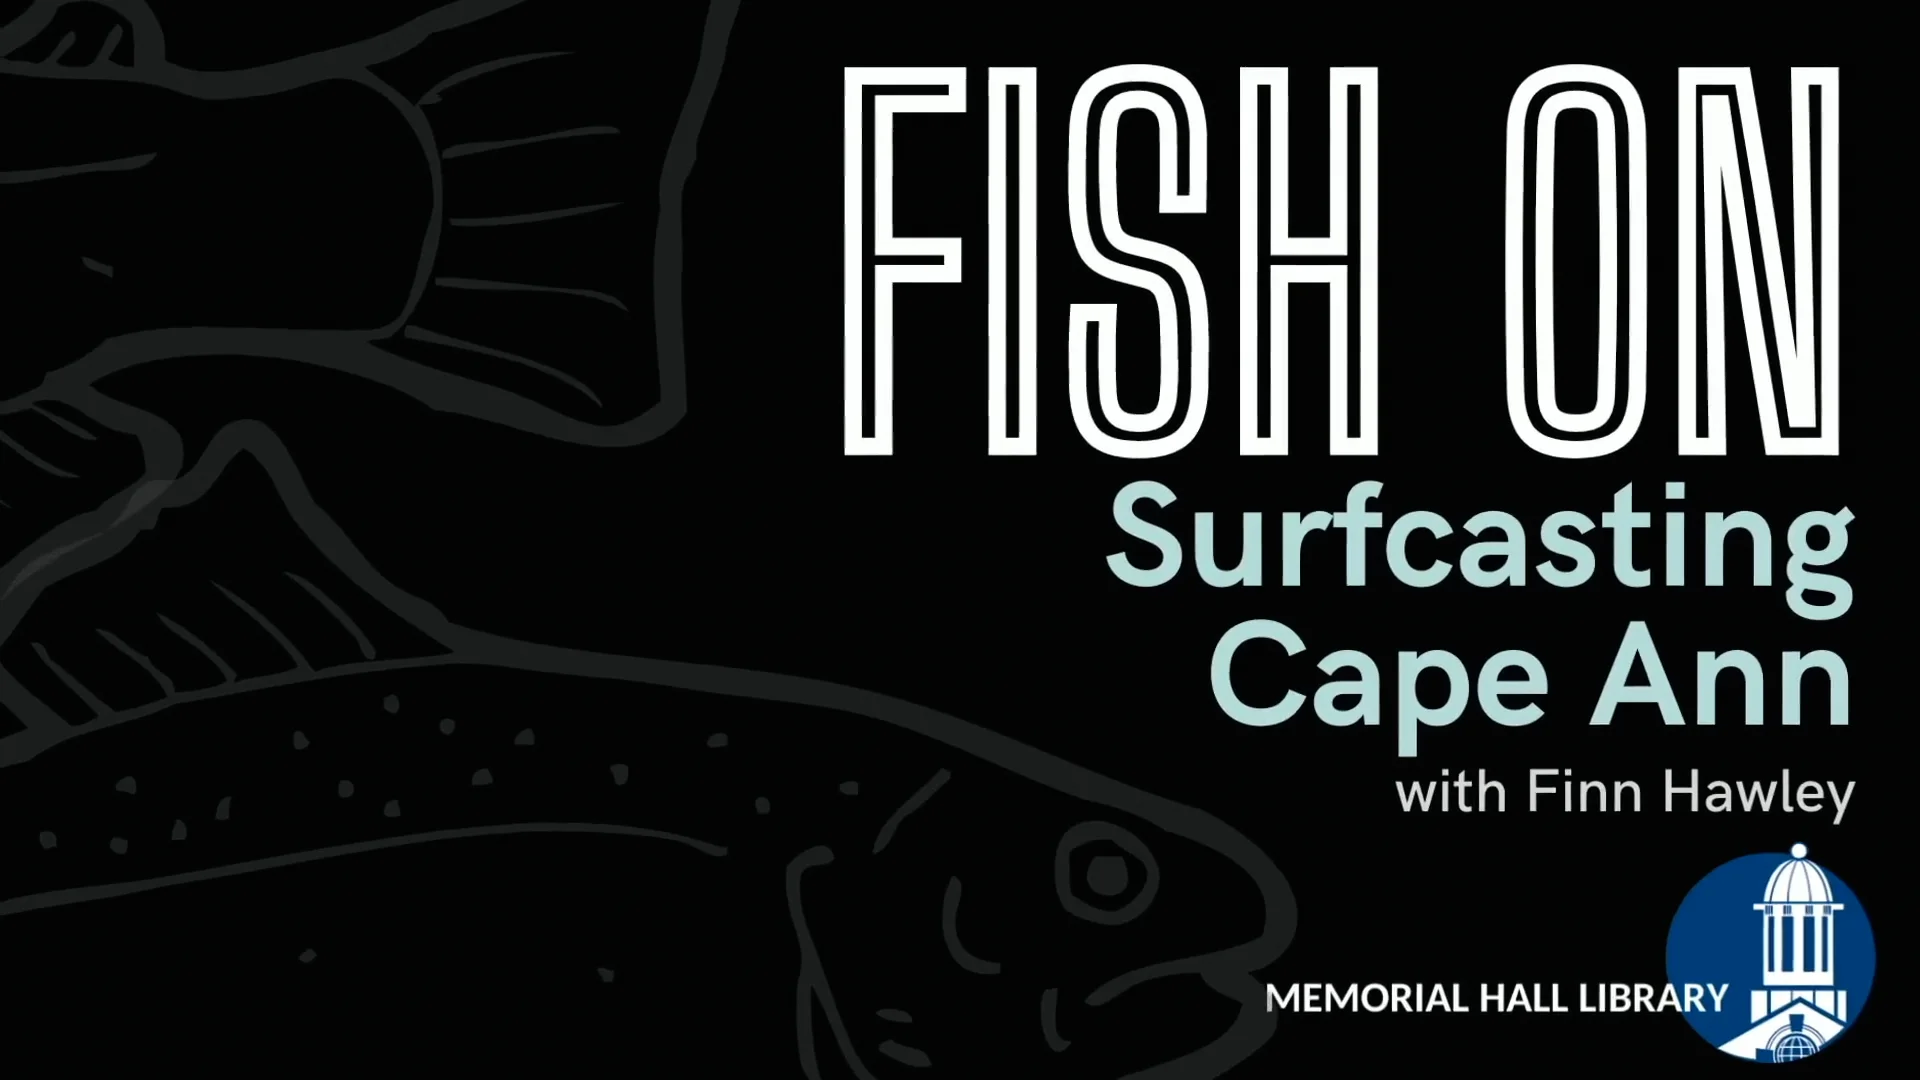 Fish On! Andover 2022 - Surfcasting Cape Ann with Finn Hawley on Vimeo